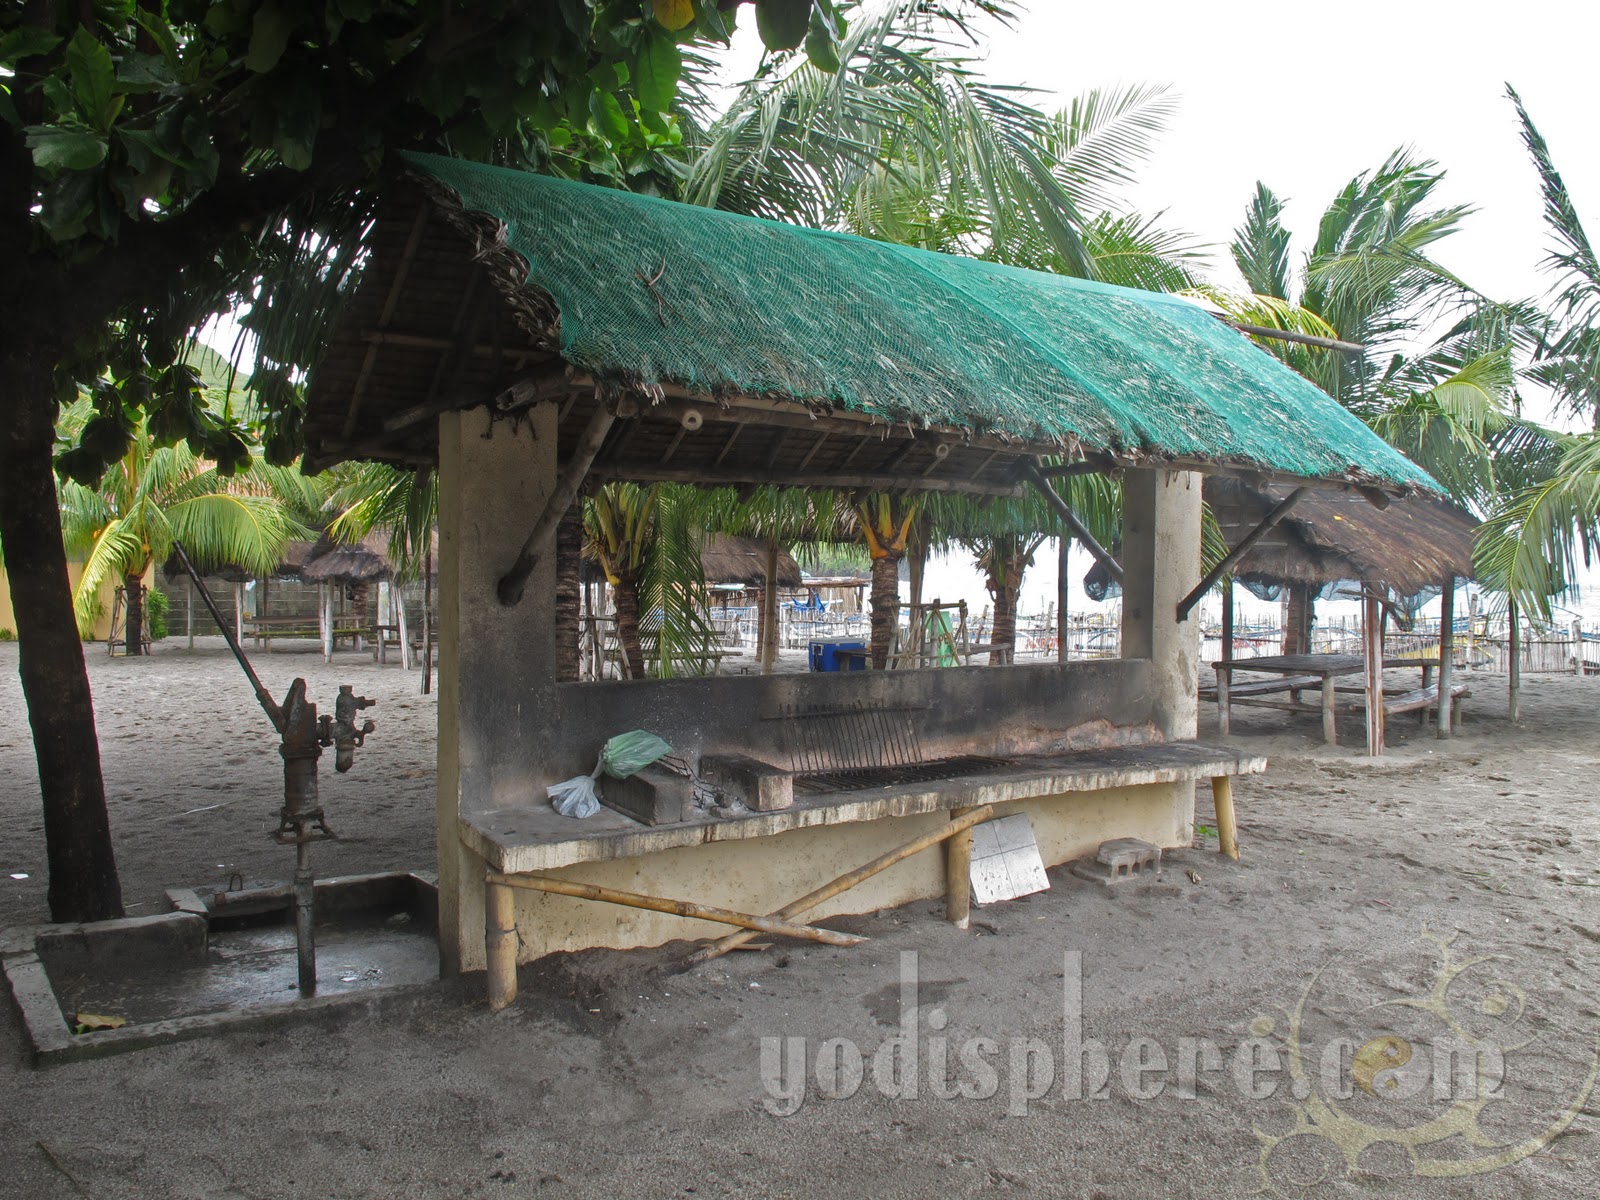  grilling stations at the resort beach nipa huts to enjoy the beach